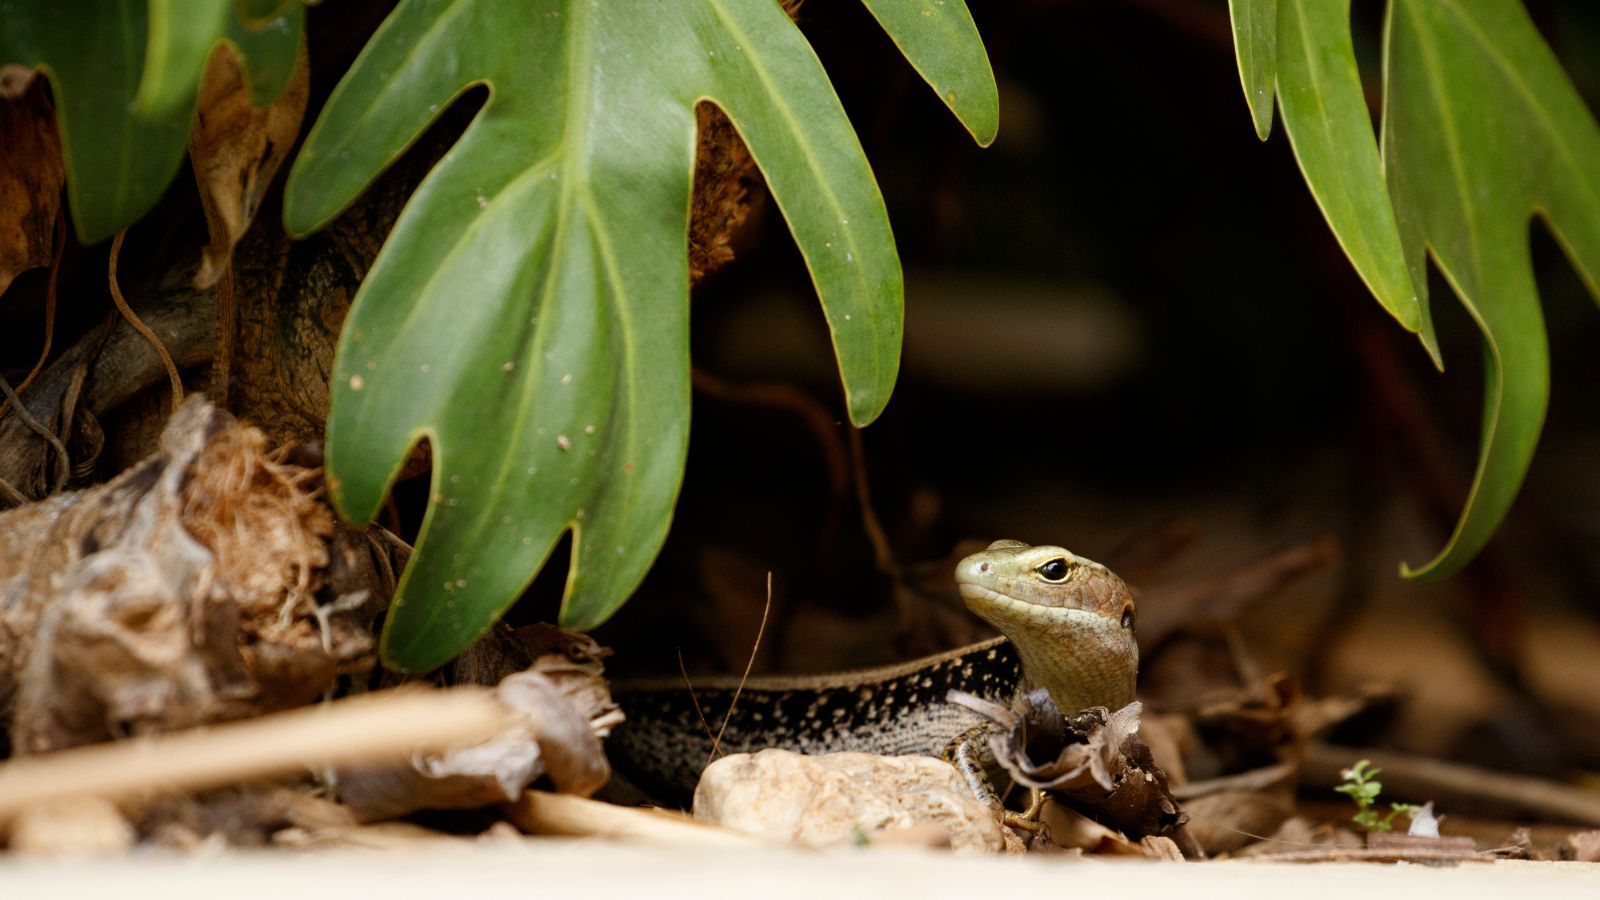 How to get rid of lizards: humane ways to remove them from your